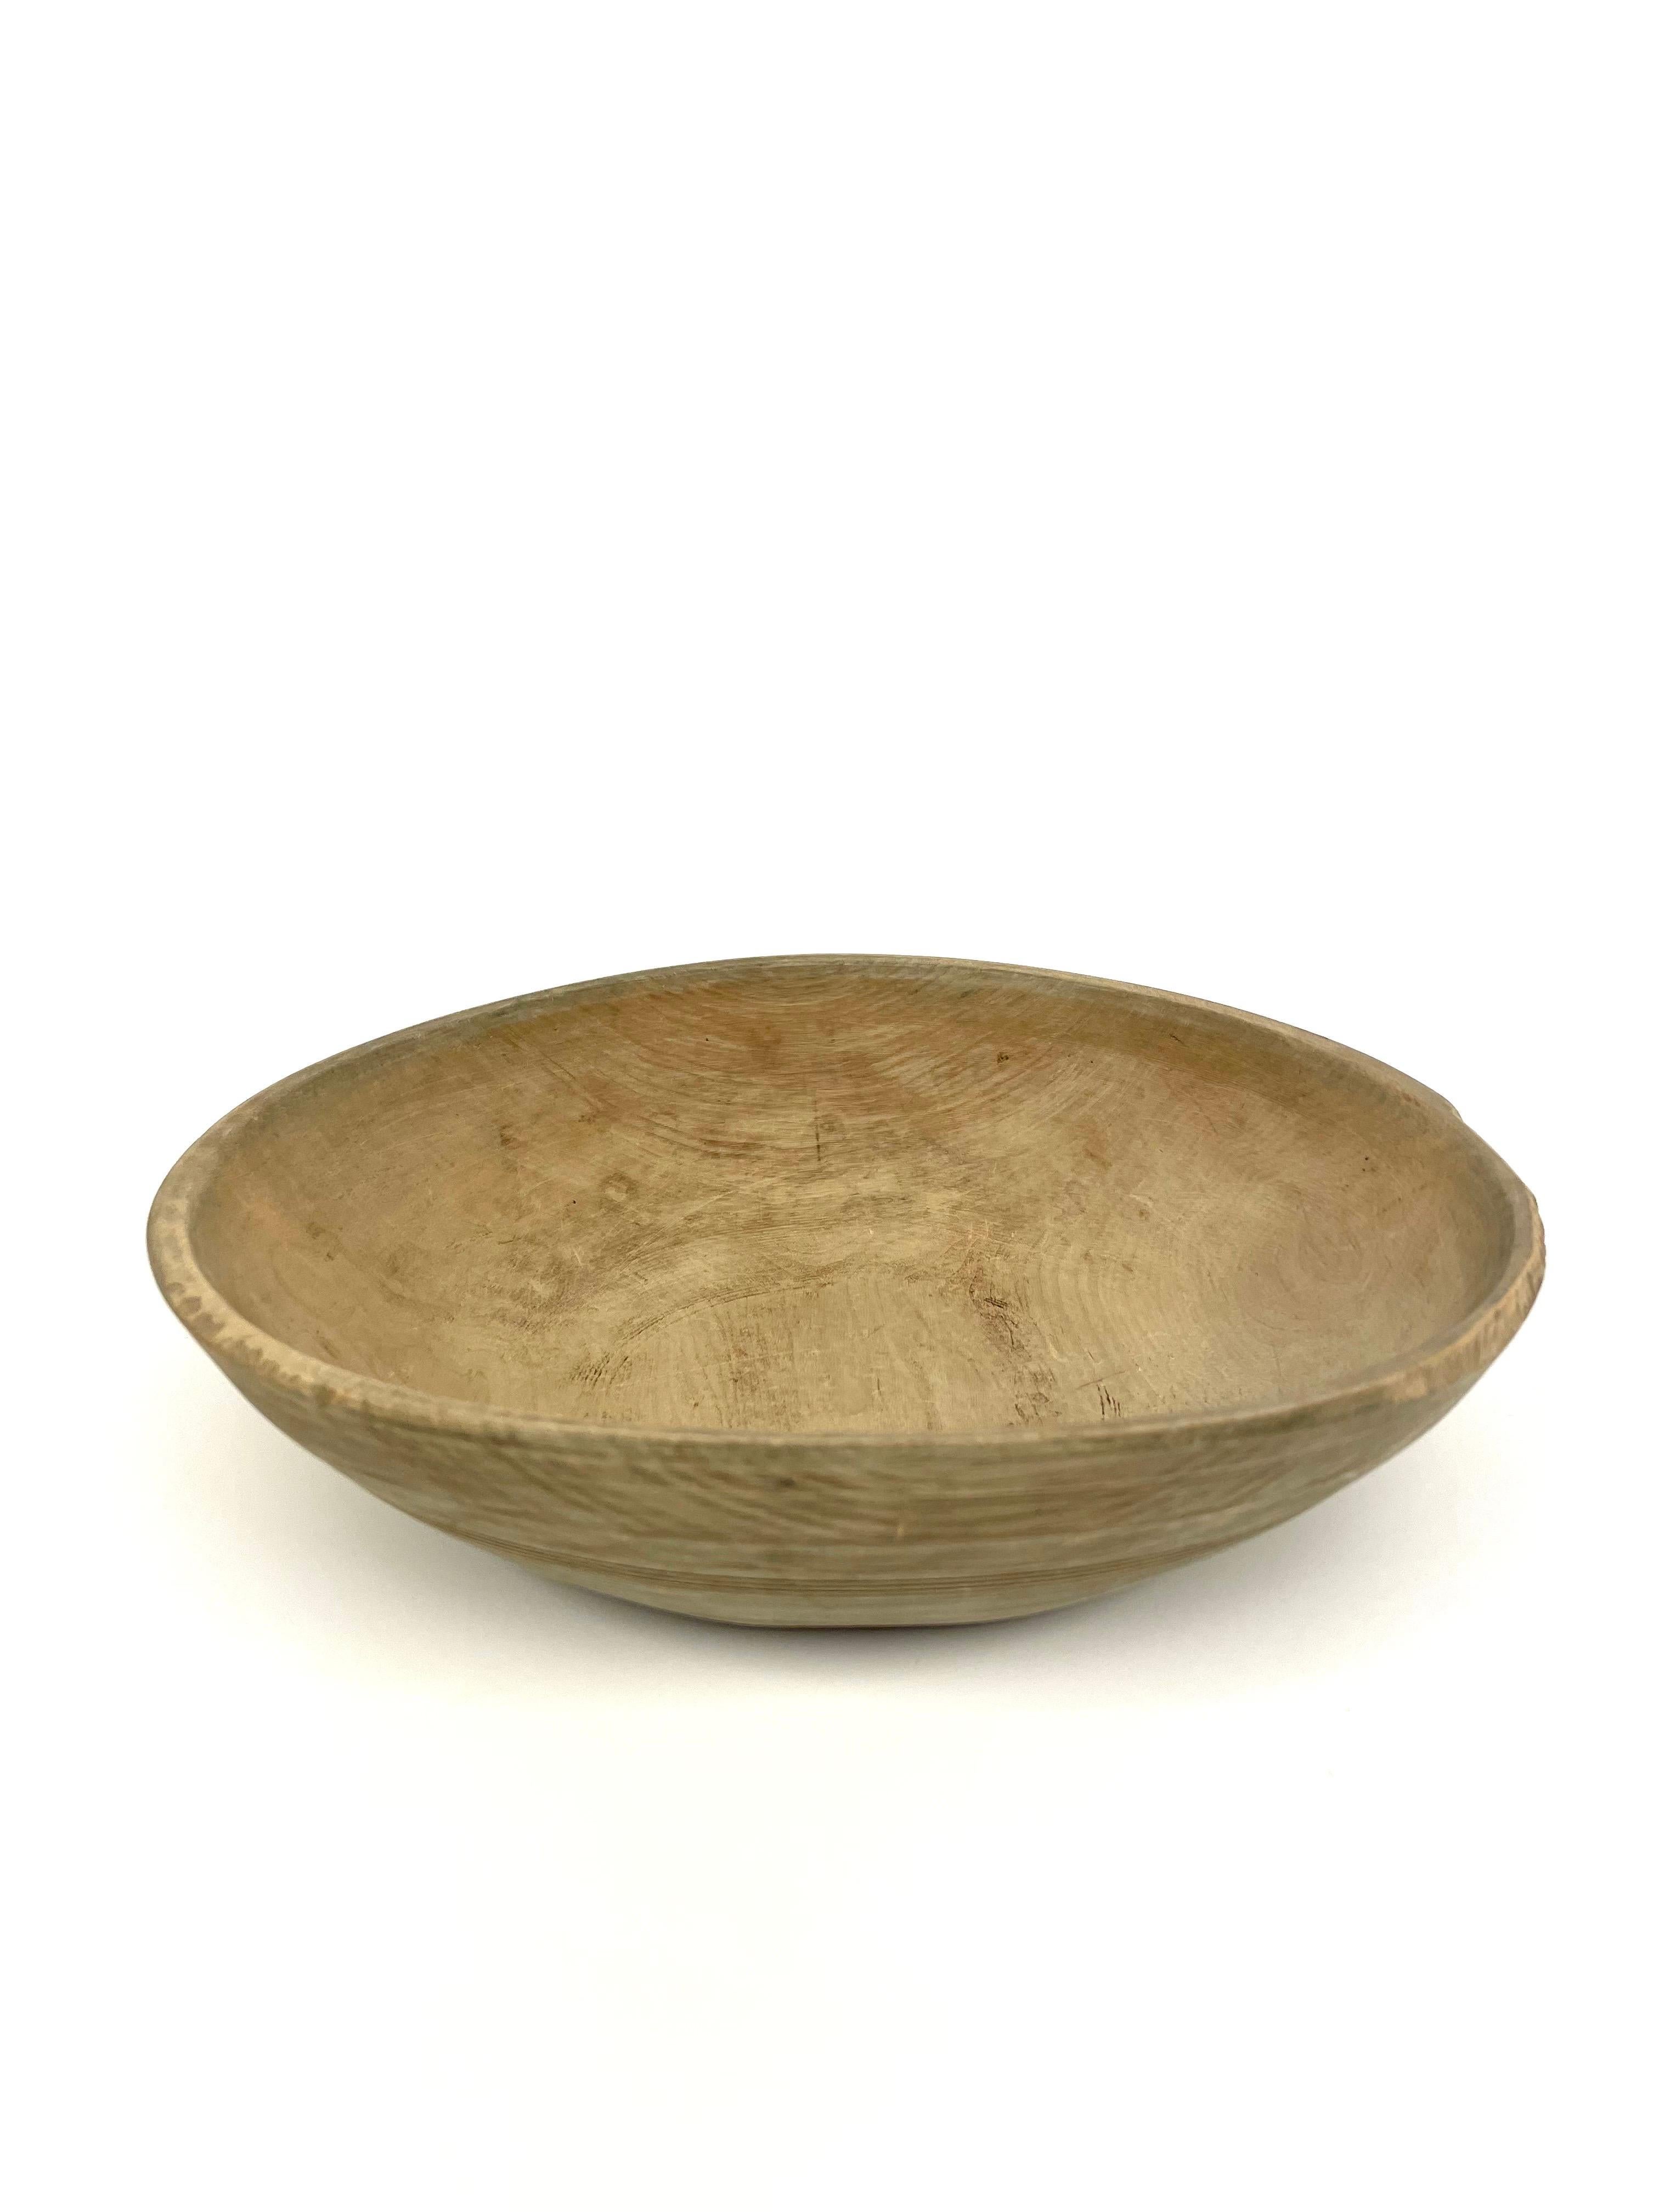 This is a beautiful Swedish hand-carfted 19th century wooden bowl in Wabi Sabi style. 
It comes made in pine with lovely patina reflecting its age and use.
It has a few decorative longitudinal turned lines. 
